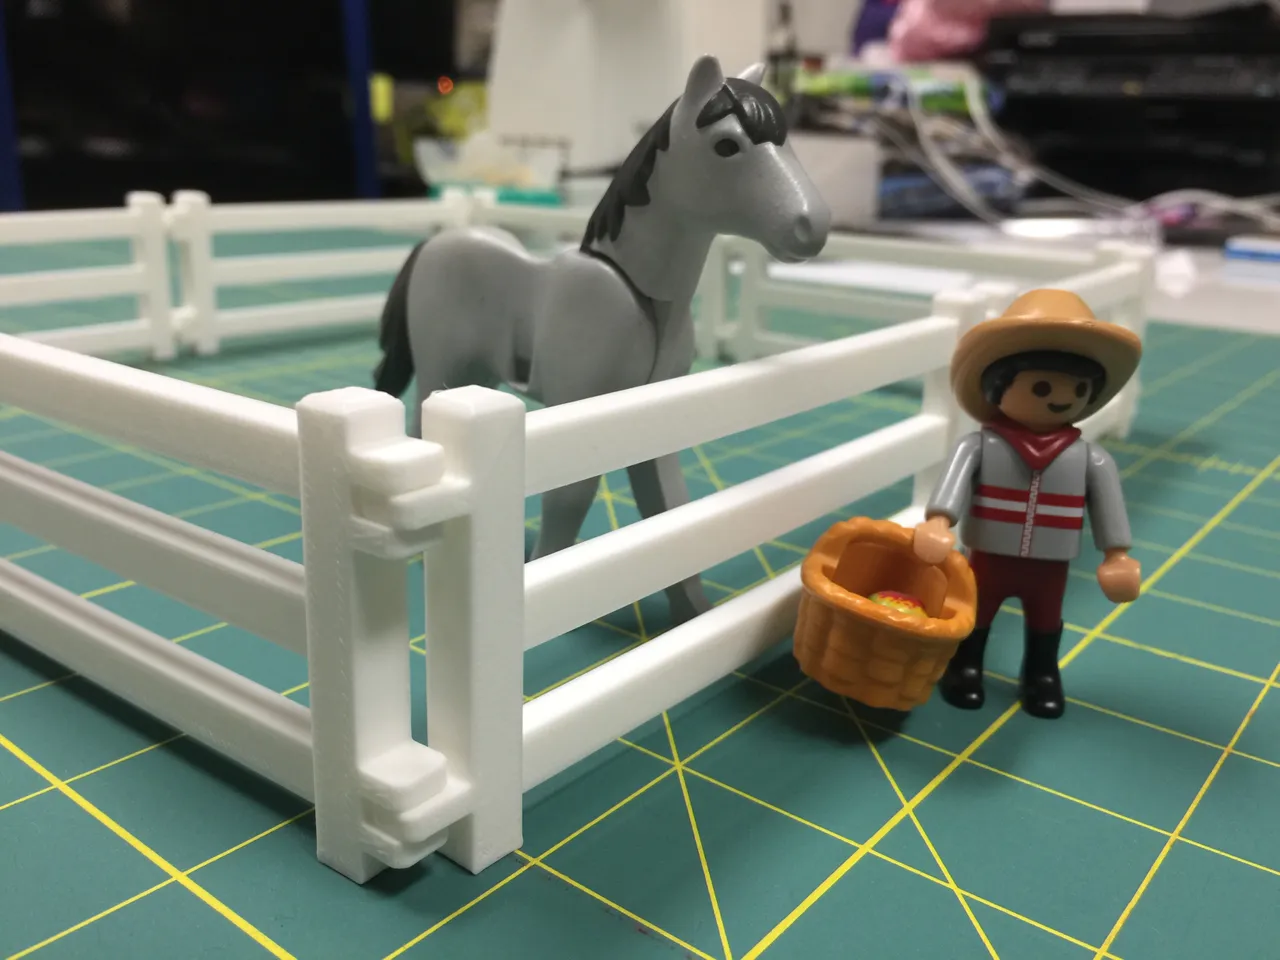 Fence armor cota print mesh 3d-playmobil horse and figure not included 